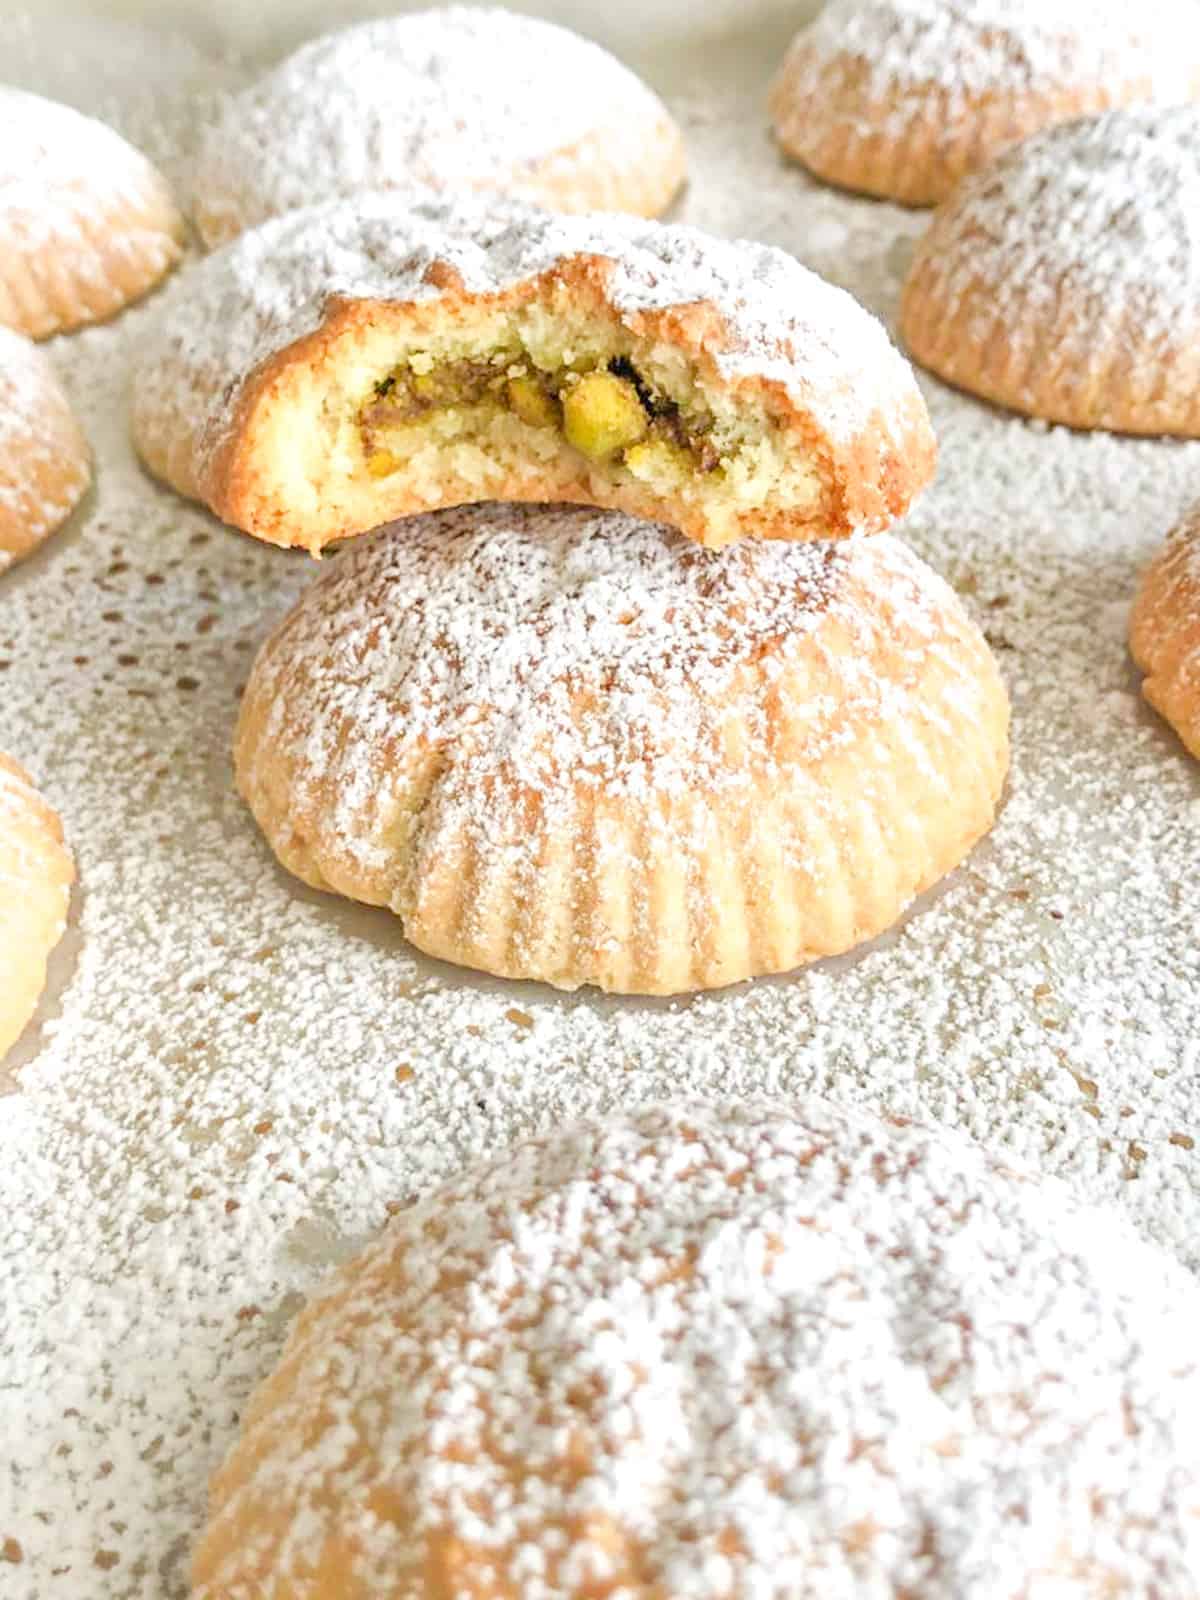 Lebanese Maamoul cookies filled with pistachios and topped with powdered sugar.